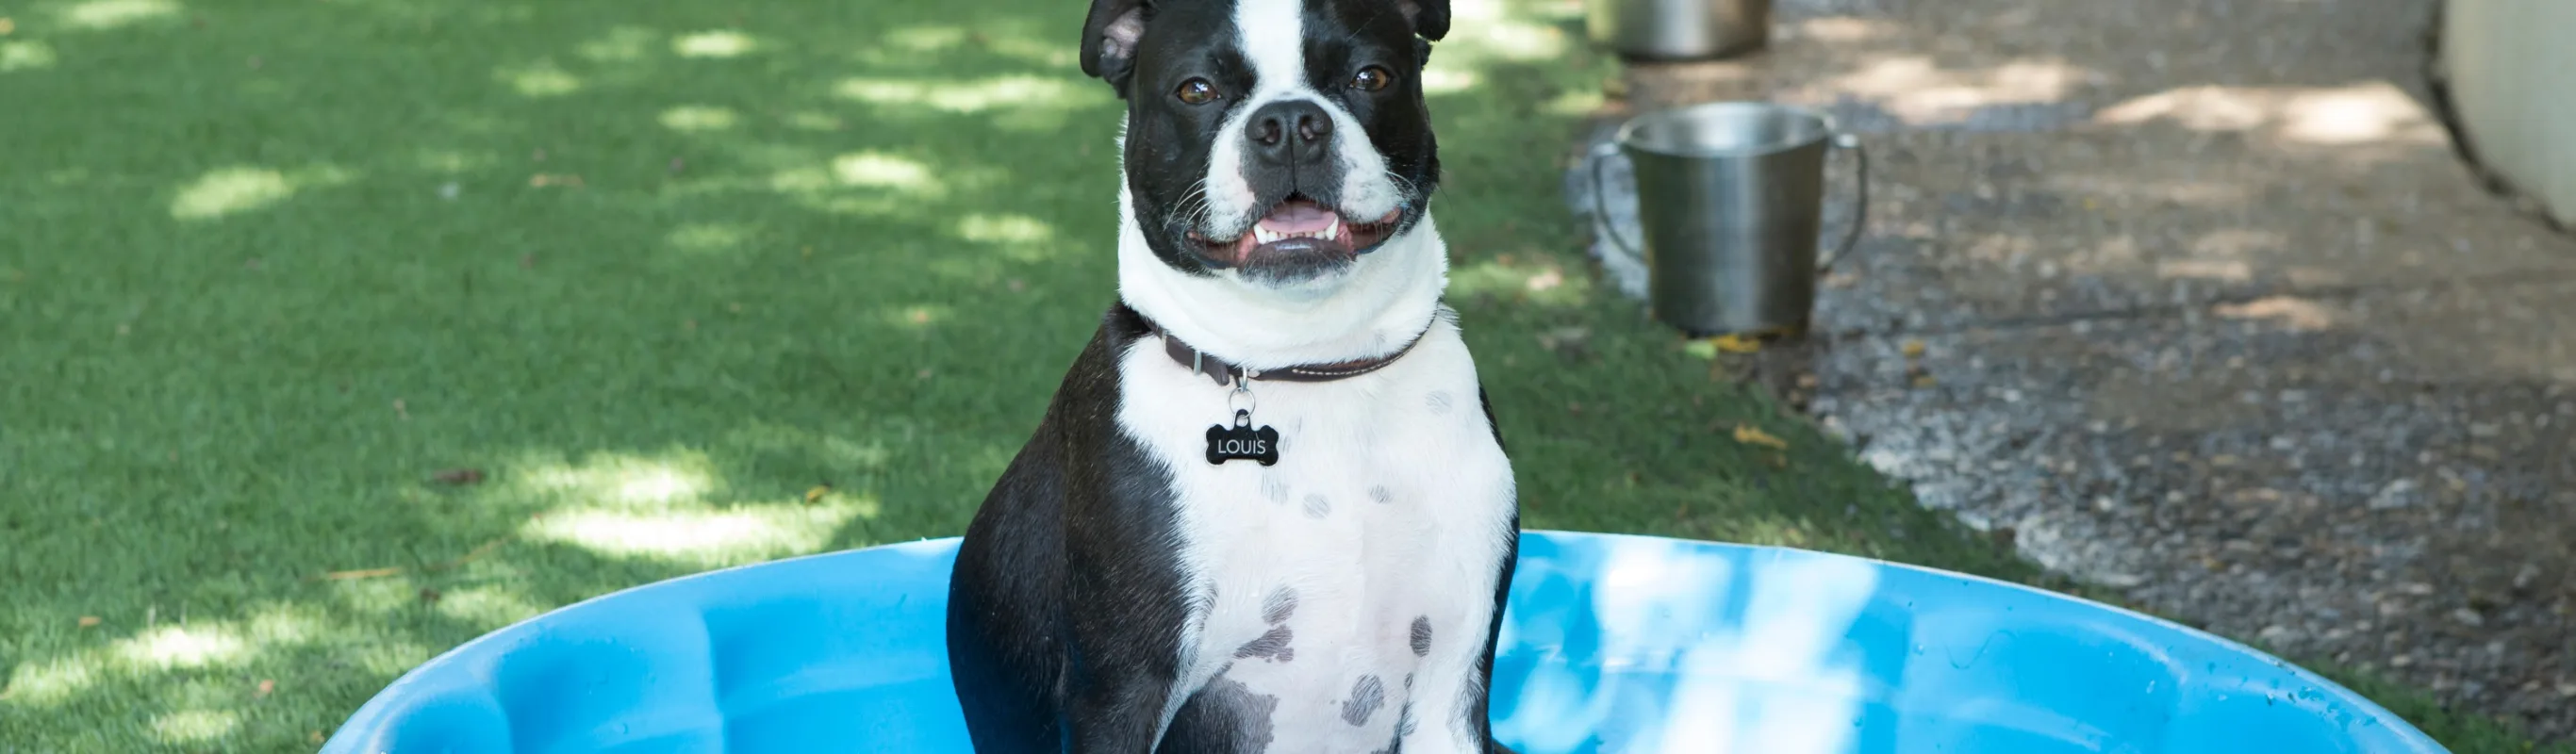 Black and white dog sitting in plastic play pool.